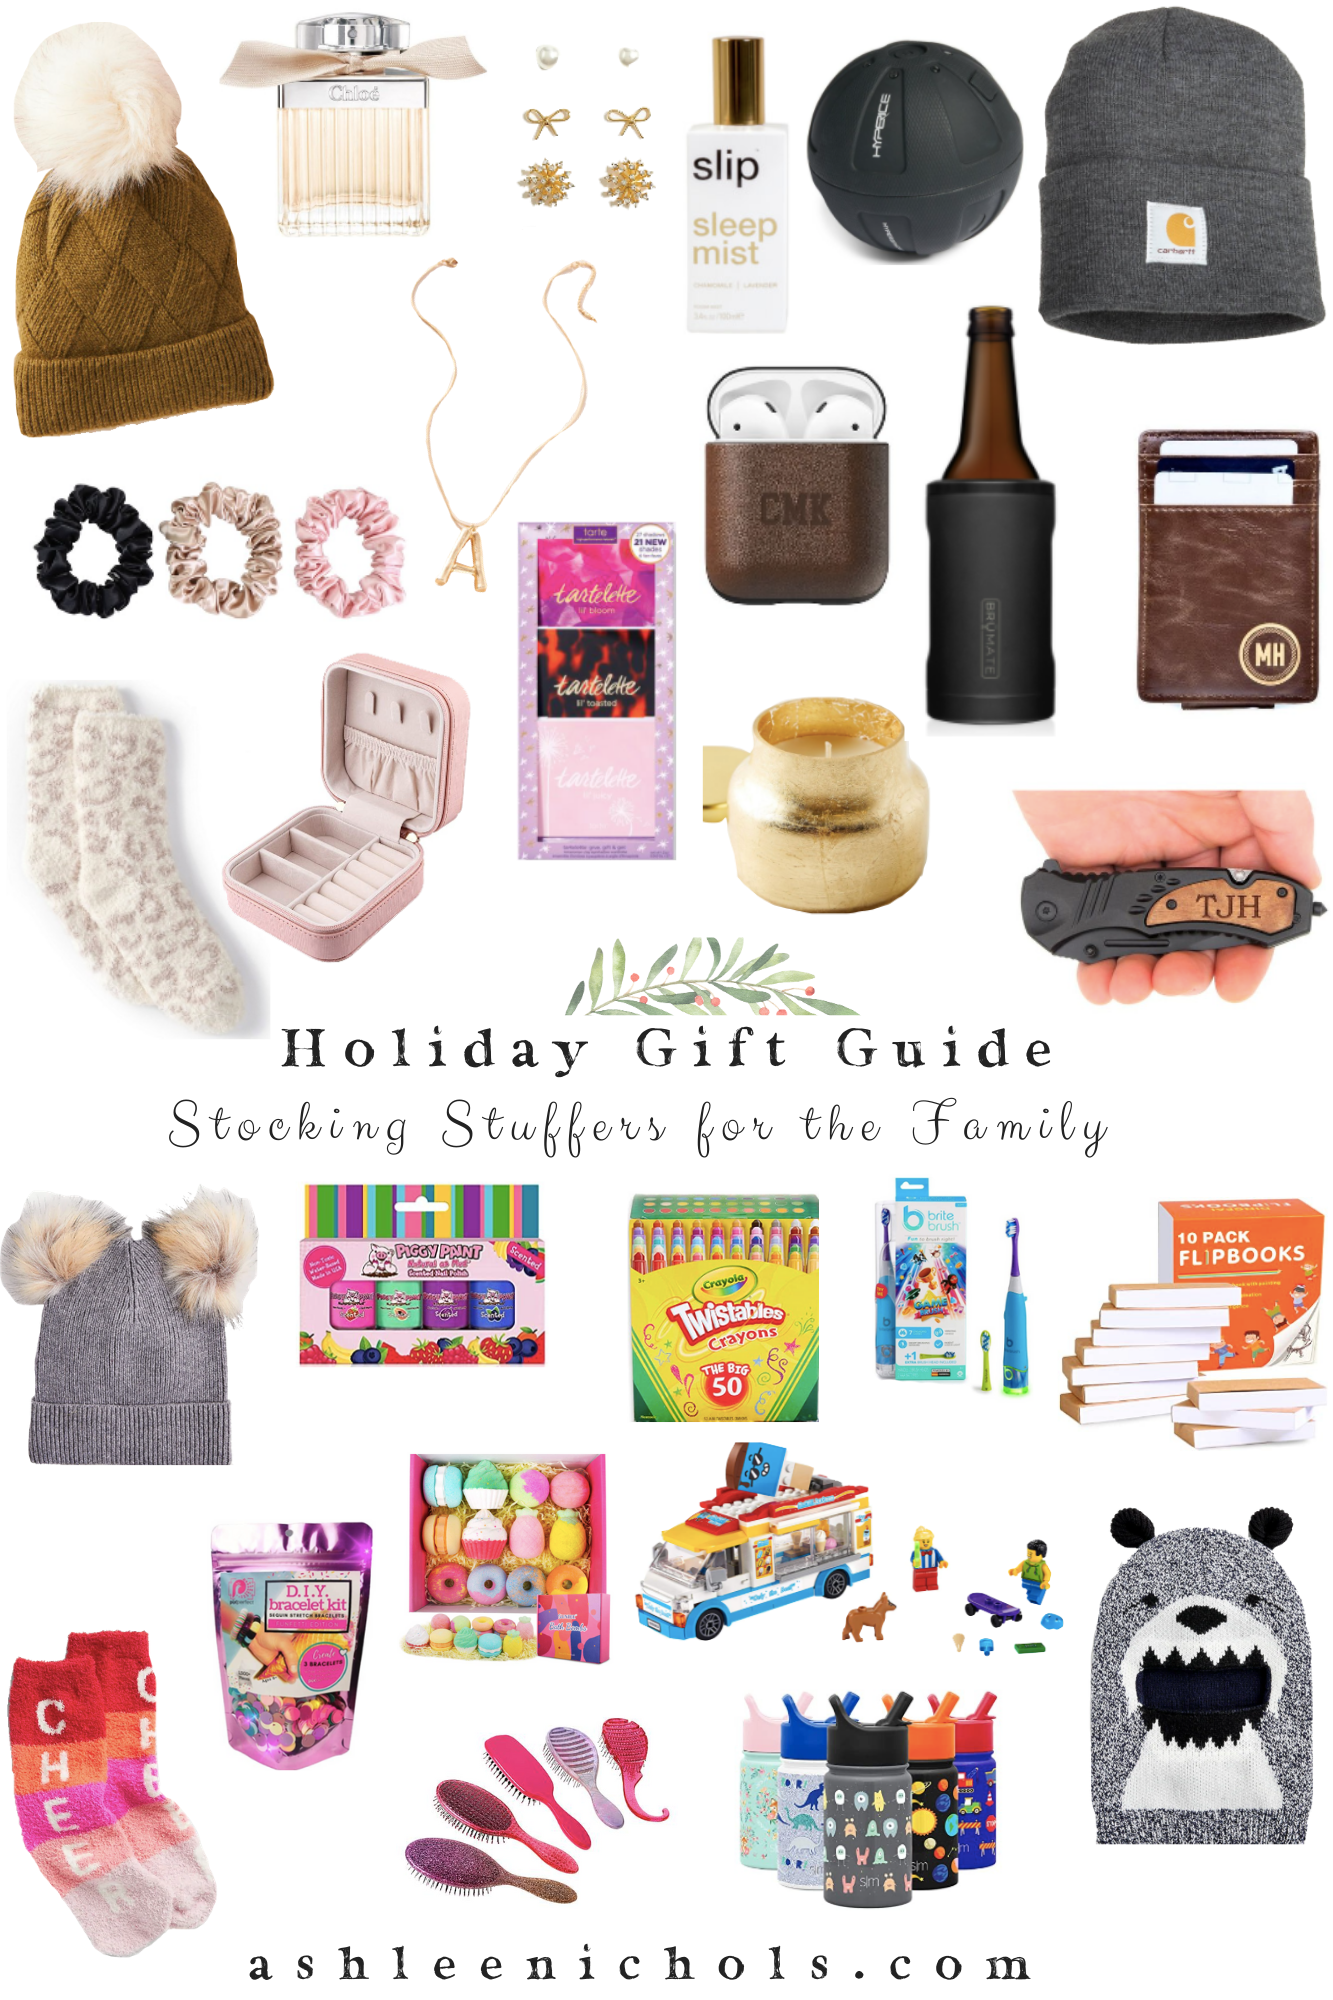 https://ashleenichols.com/wp-content/uploads/2020/11/Holiday-Gift-Guide-Stocking-Stuffers-for-the-family-1.png